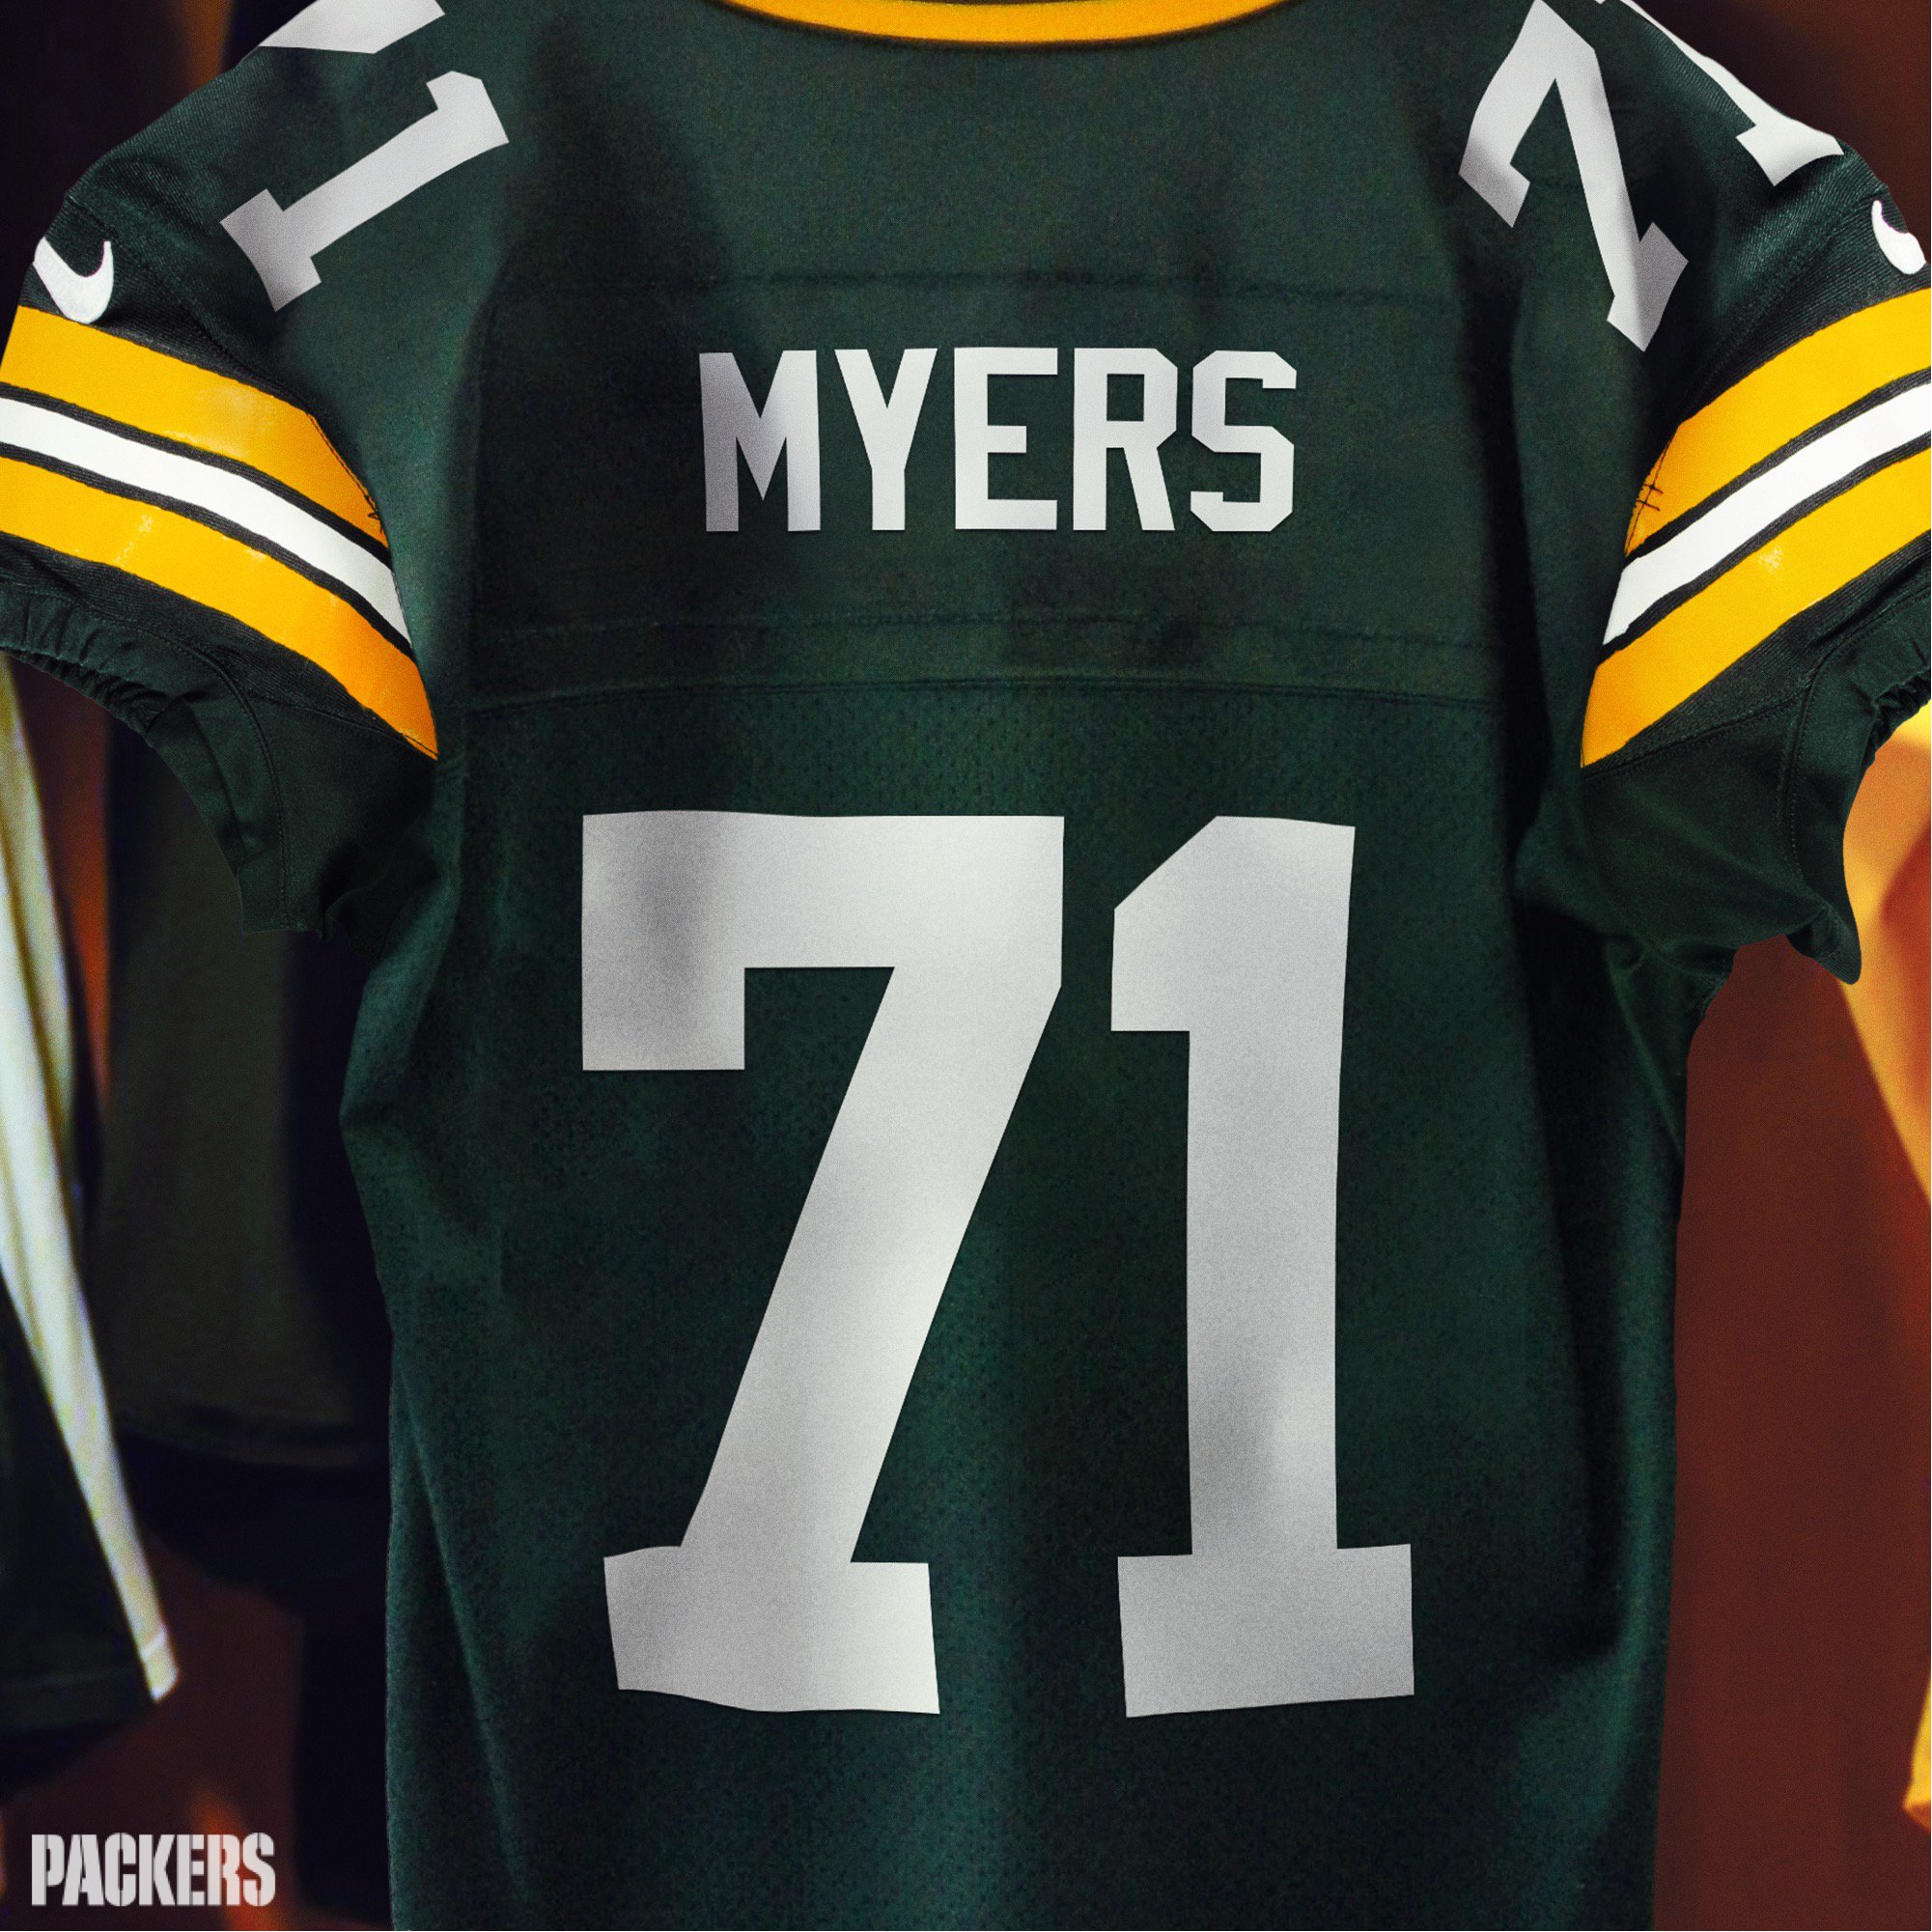 myers green bay packers